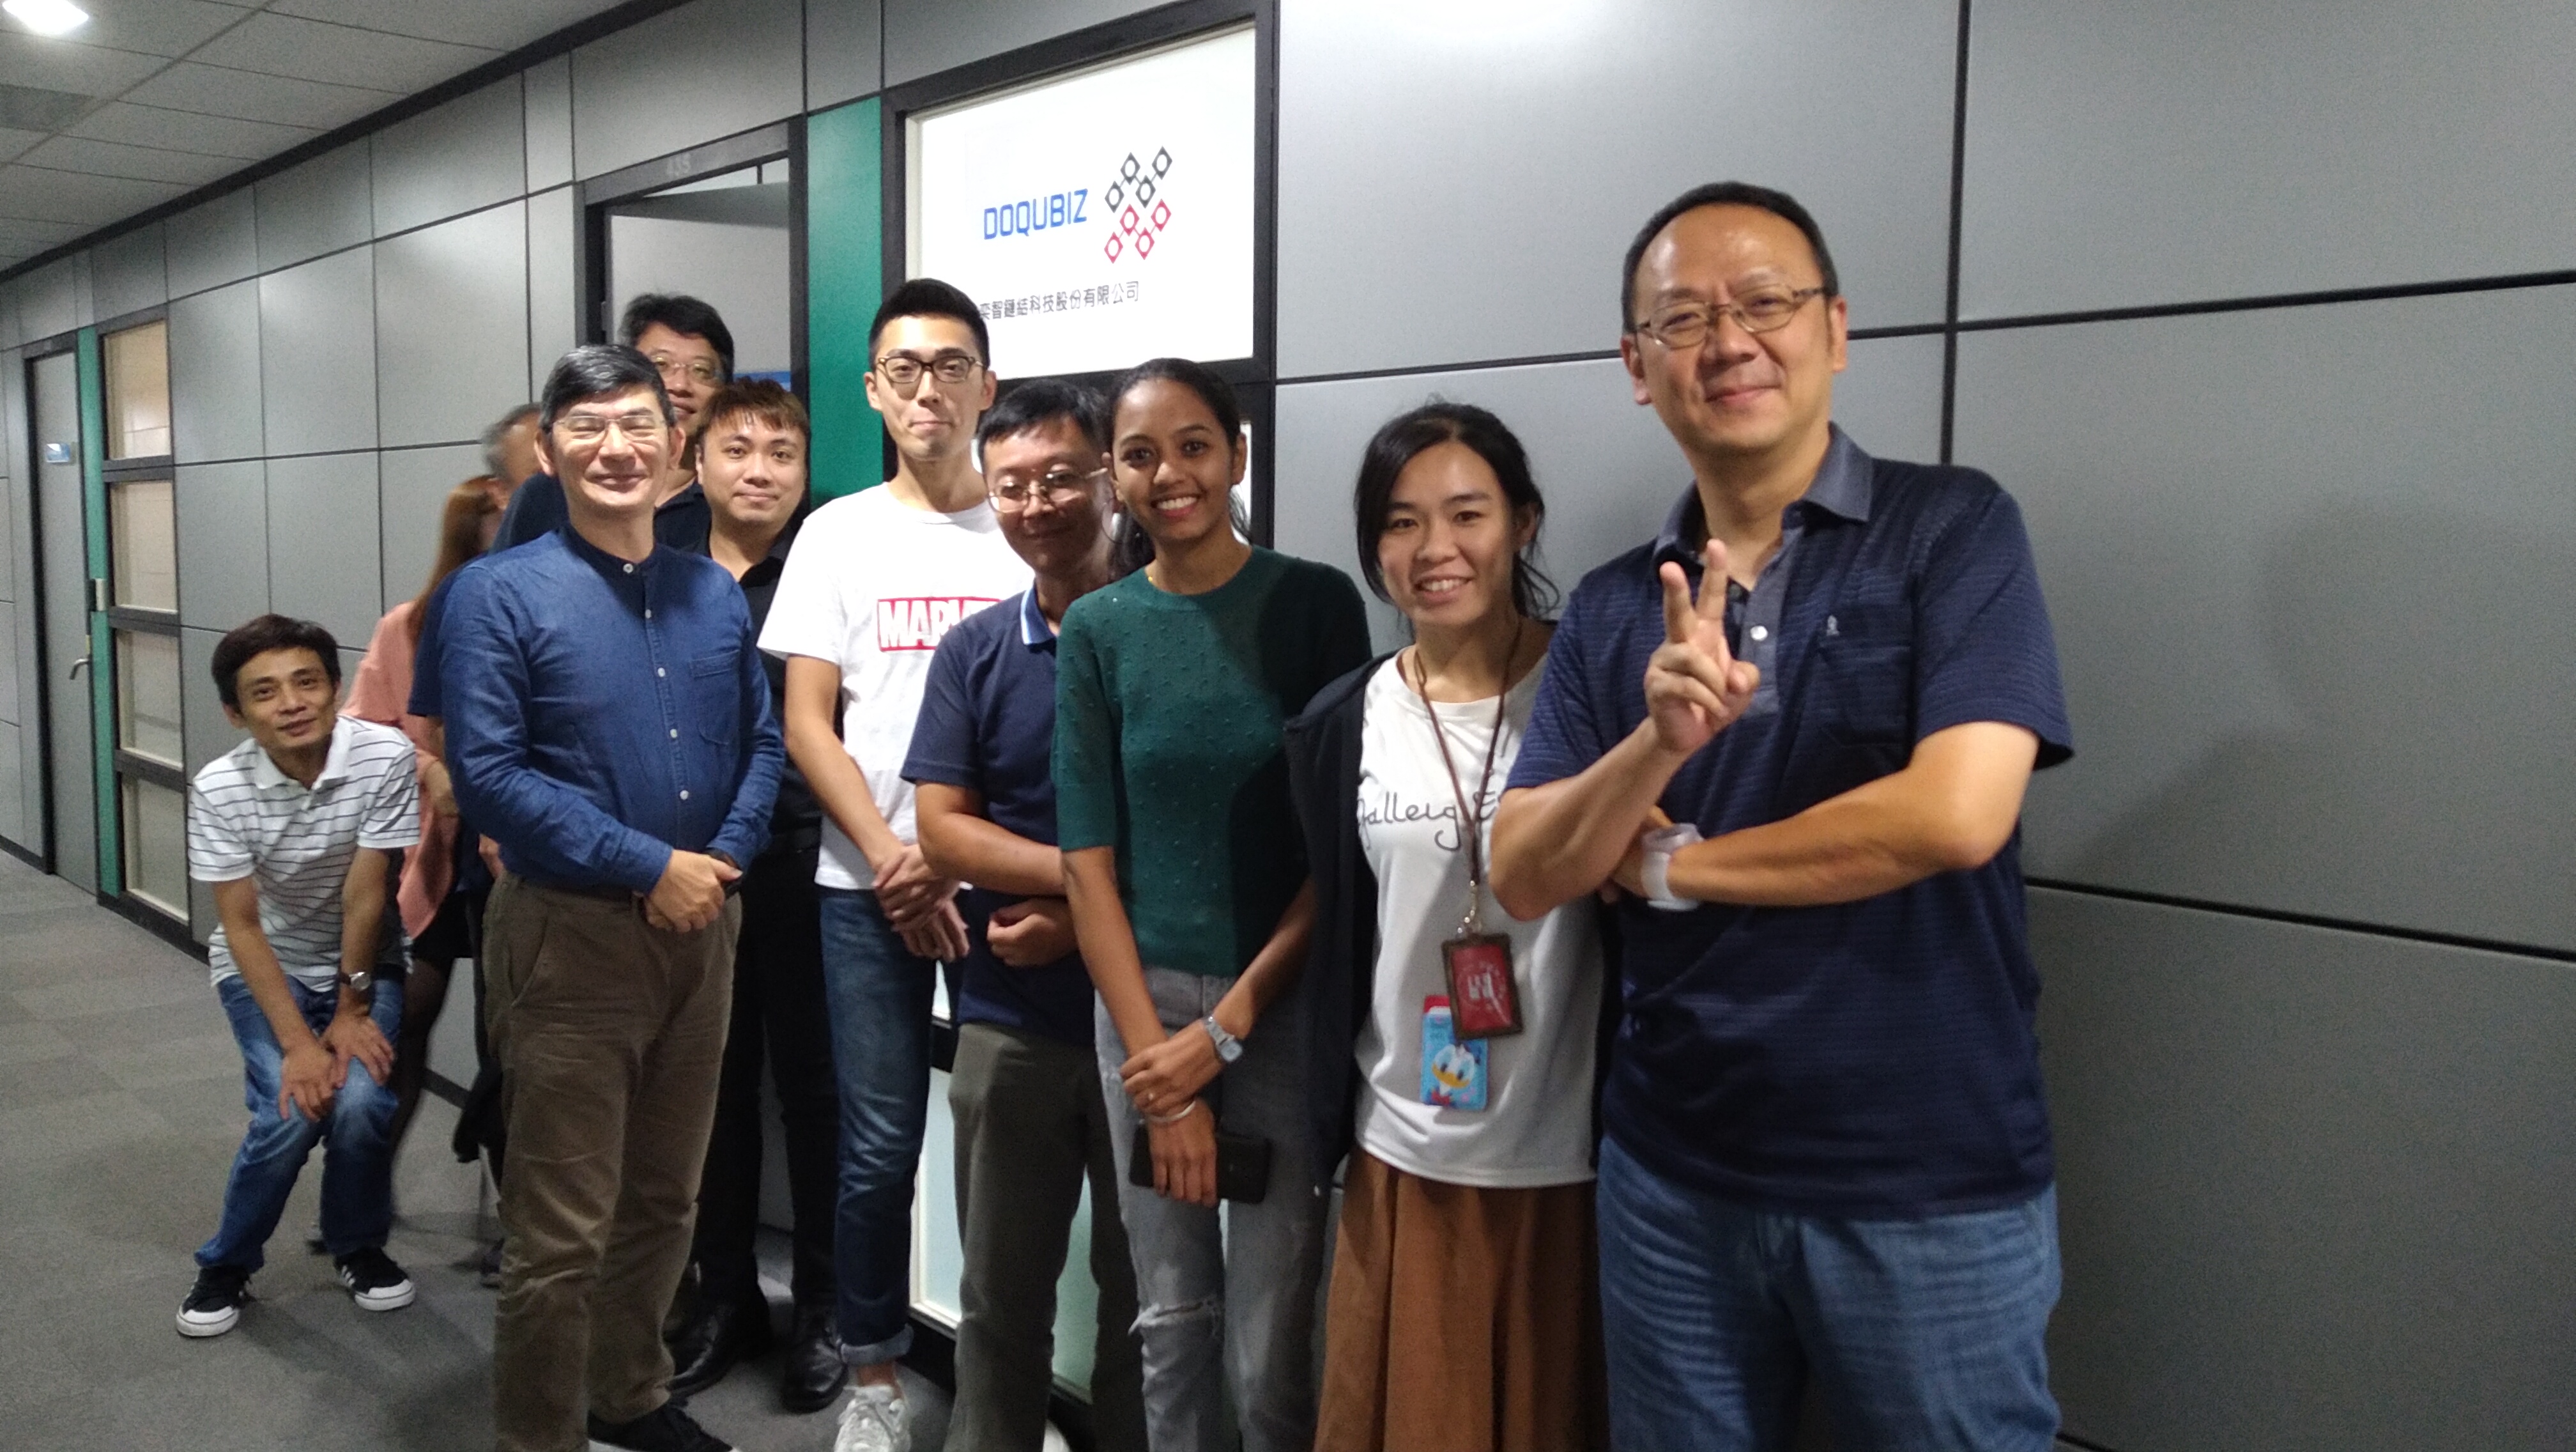 Caption: Keng Lee (First Row 1), DoQubiz CEO and his team